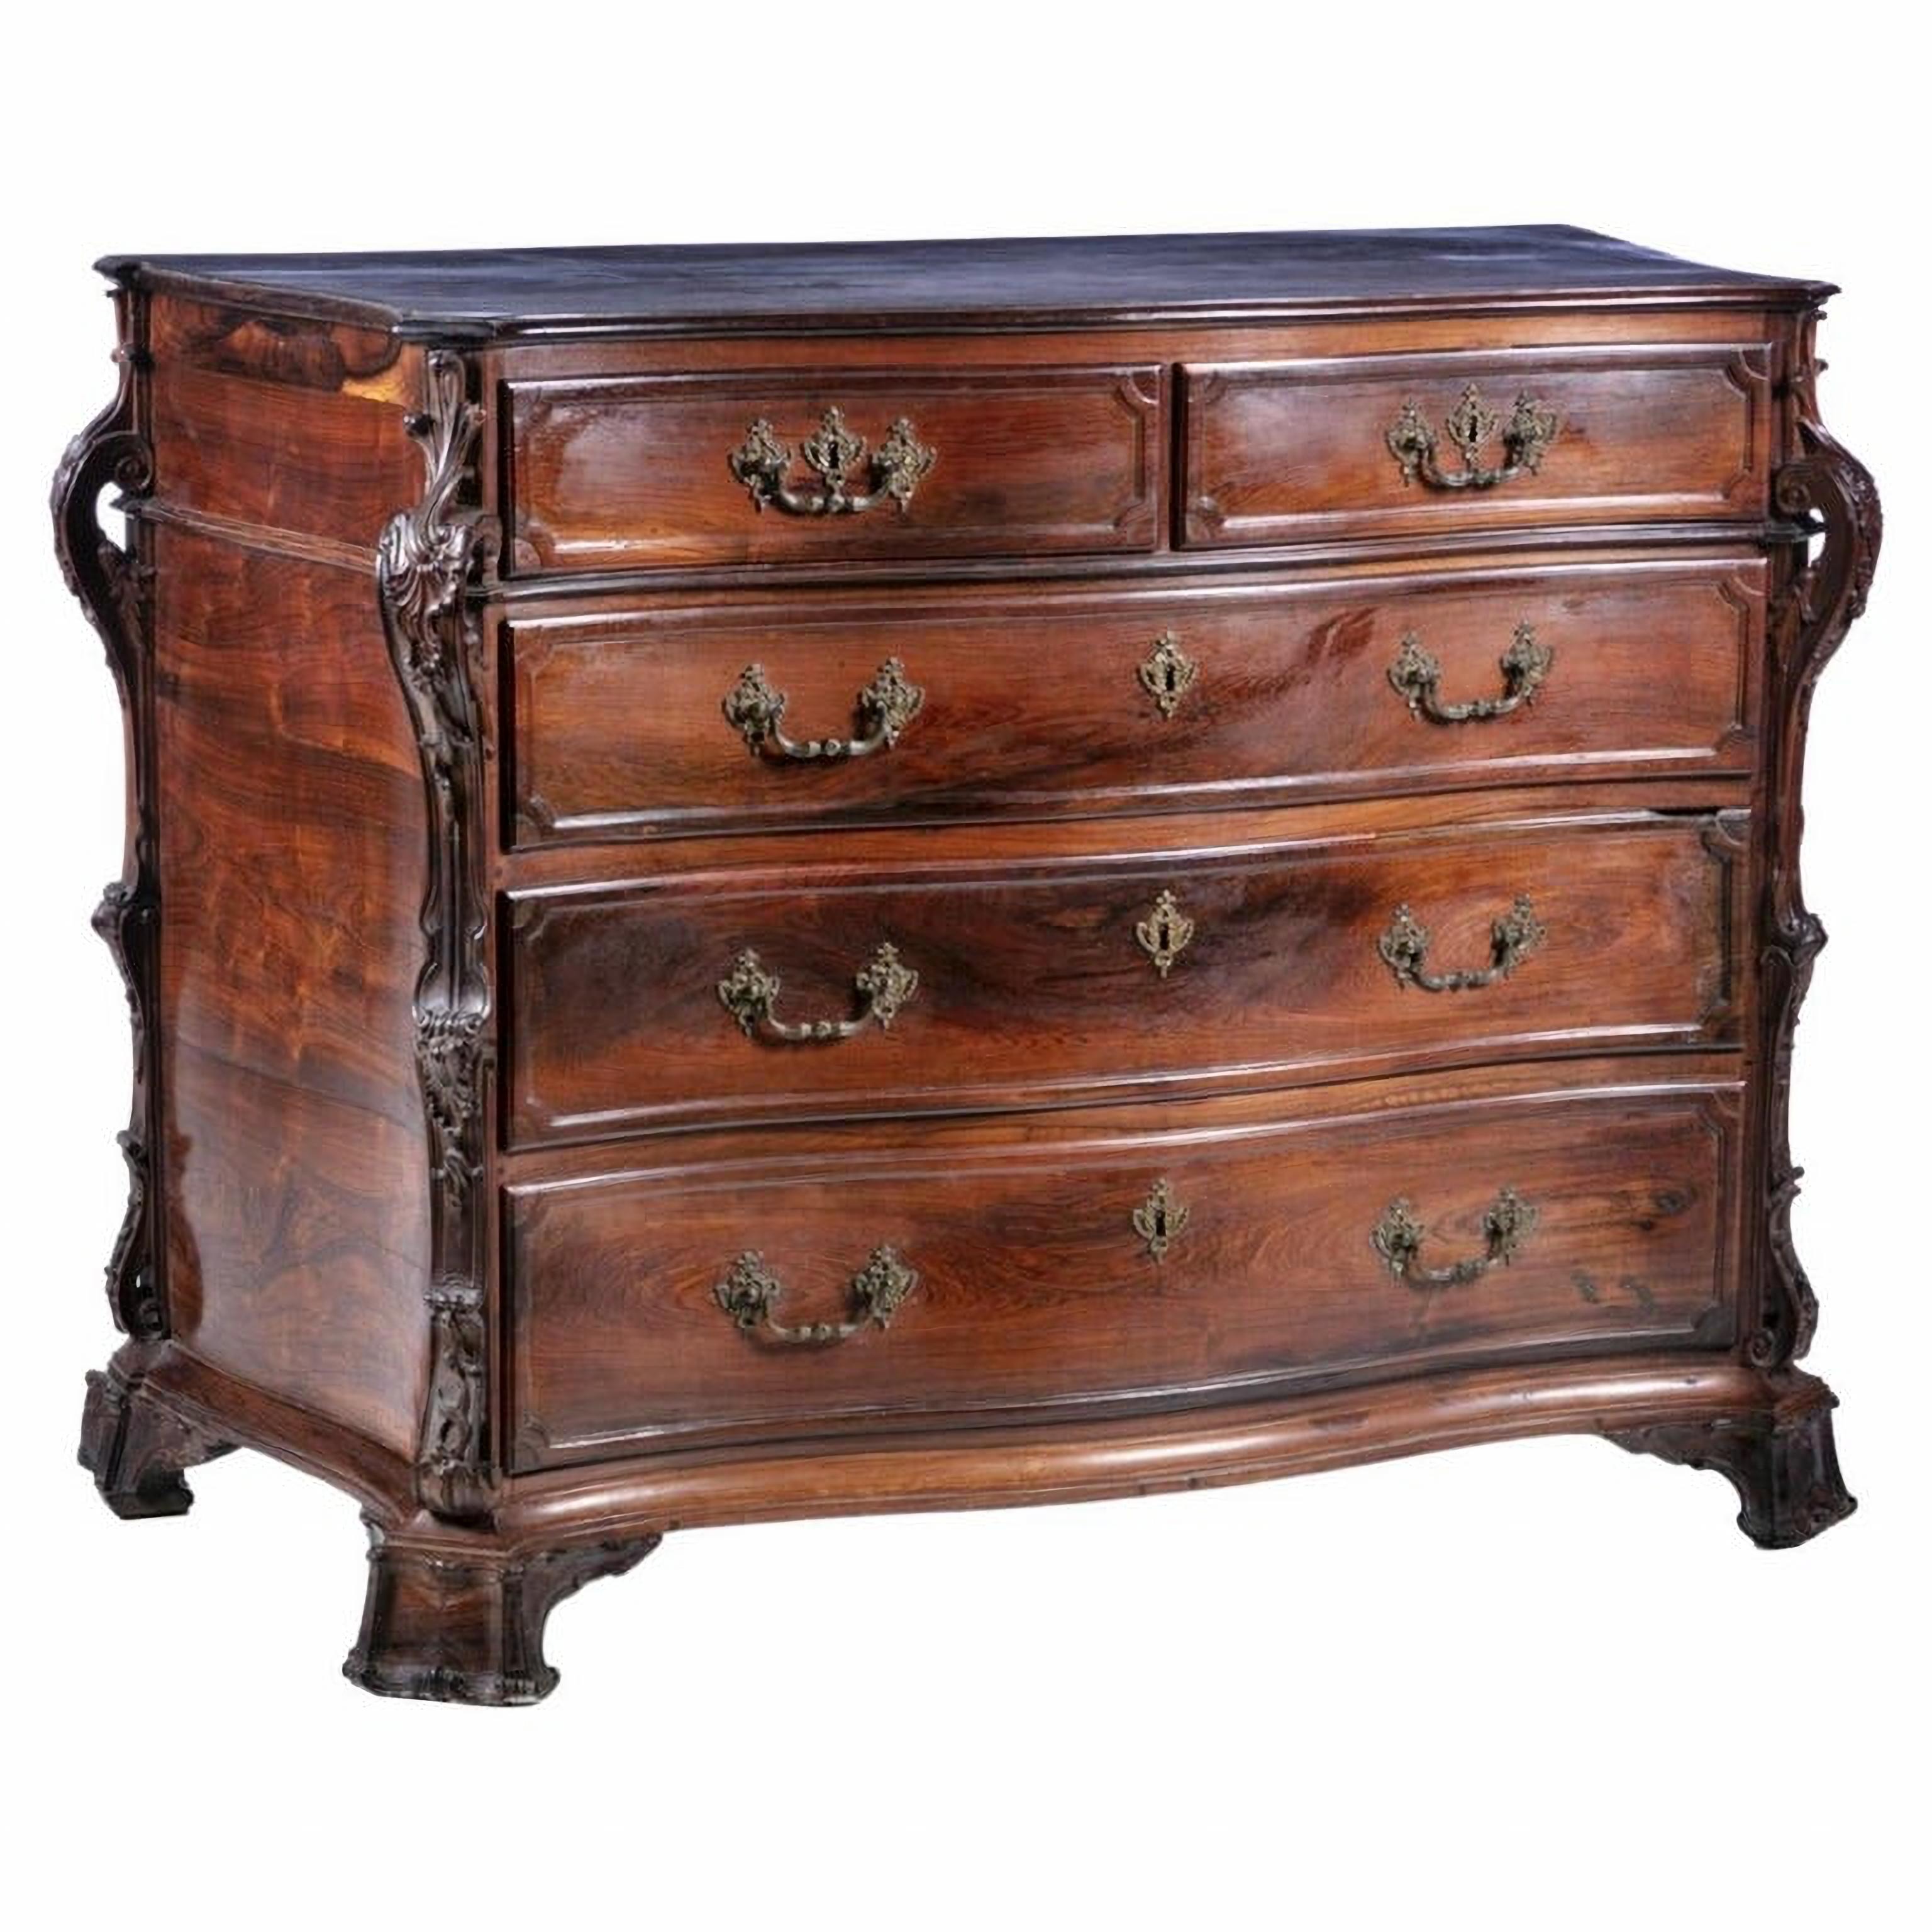 Hand-Crafted Important Portuguese Commode 18th Century in Carved Brazilian Rosewood VIDEO For Sale